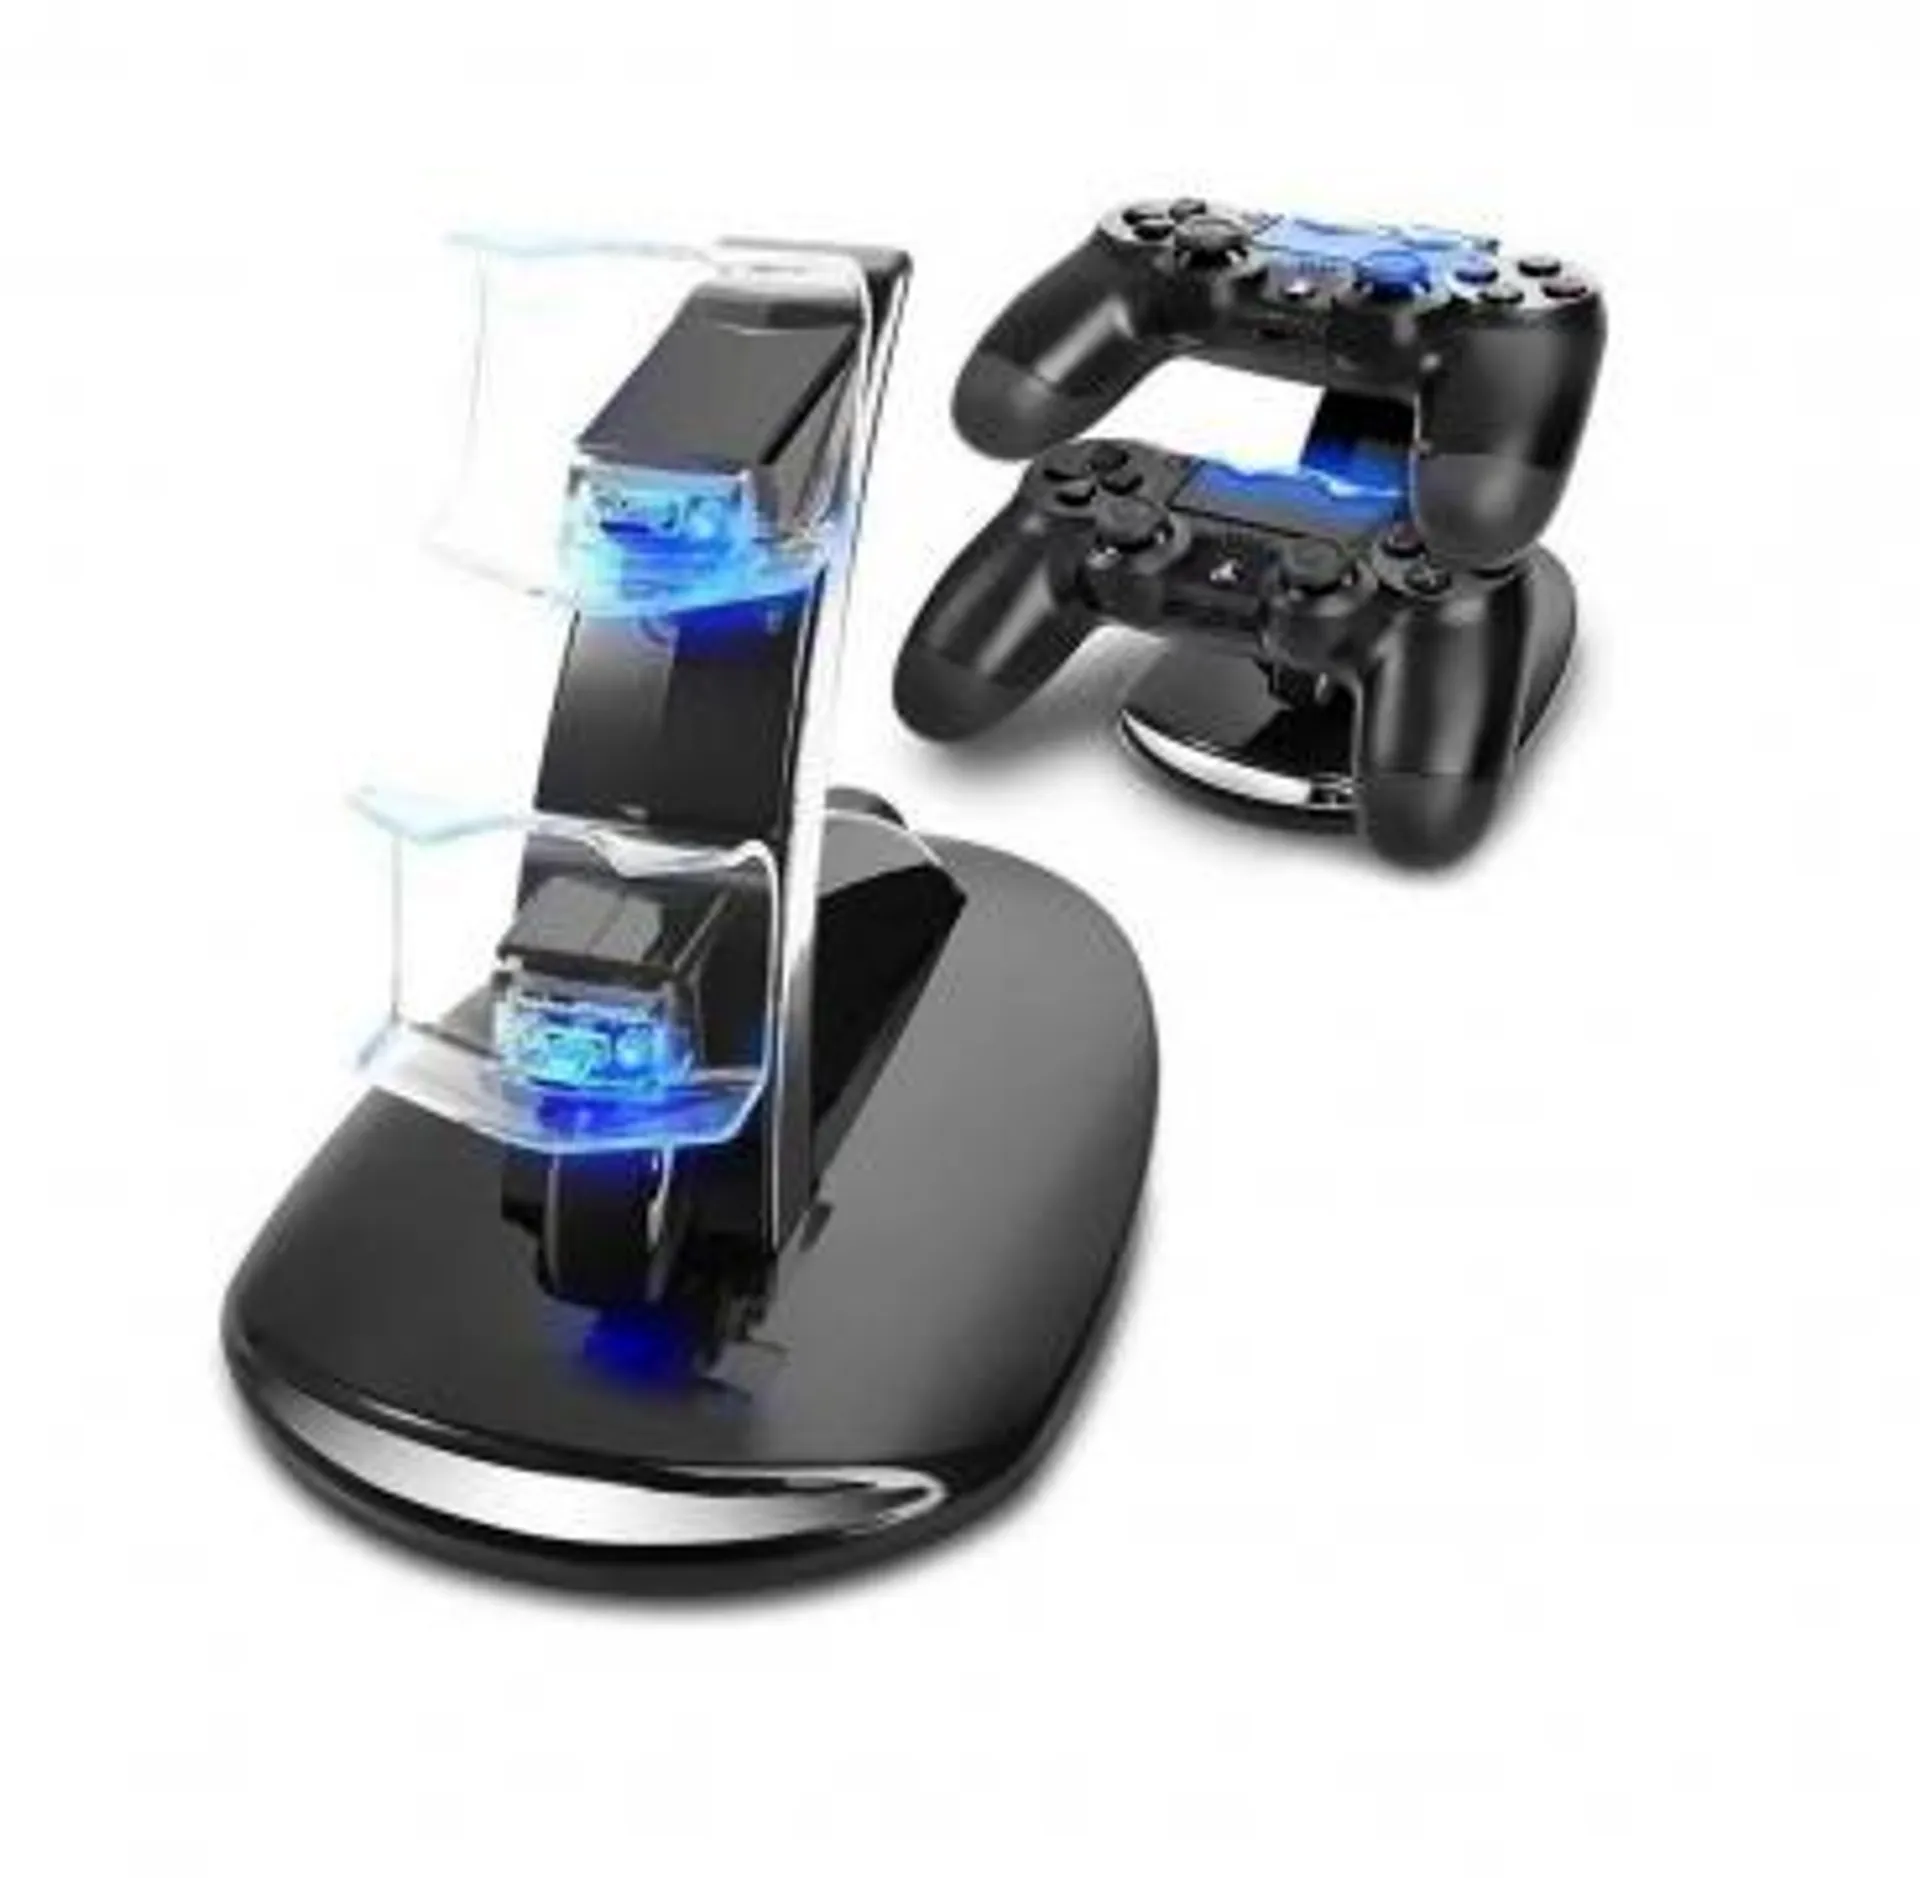 Playstation 4 Gamepad Controller Docking Station Charger PS4